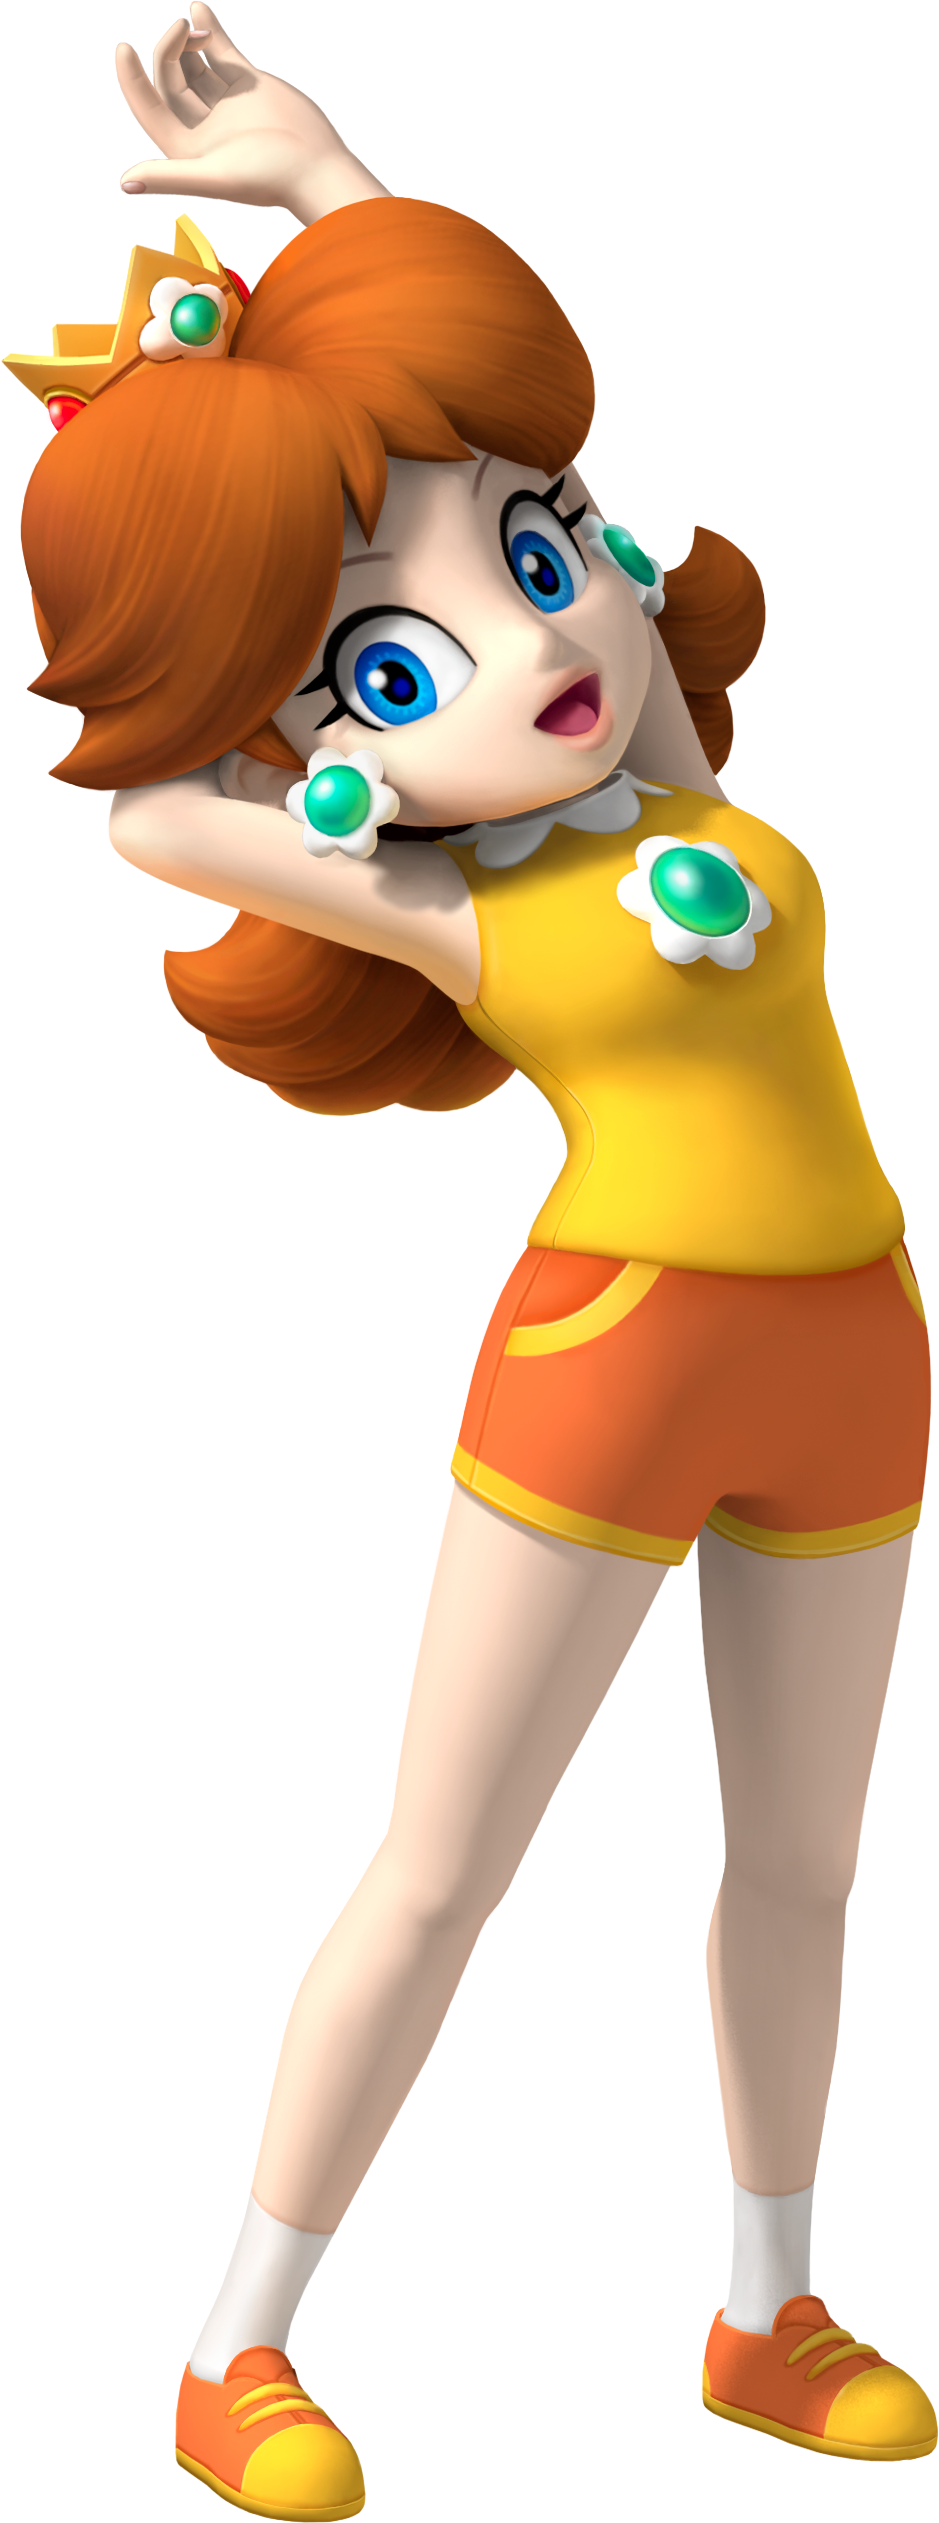  daisy tennis outfit